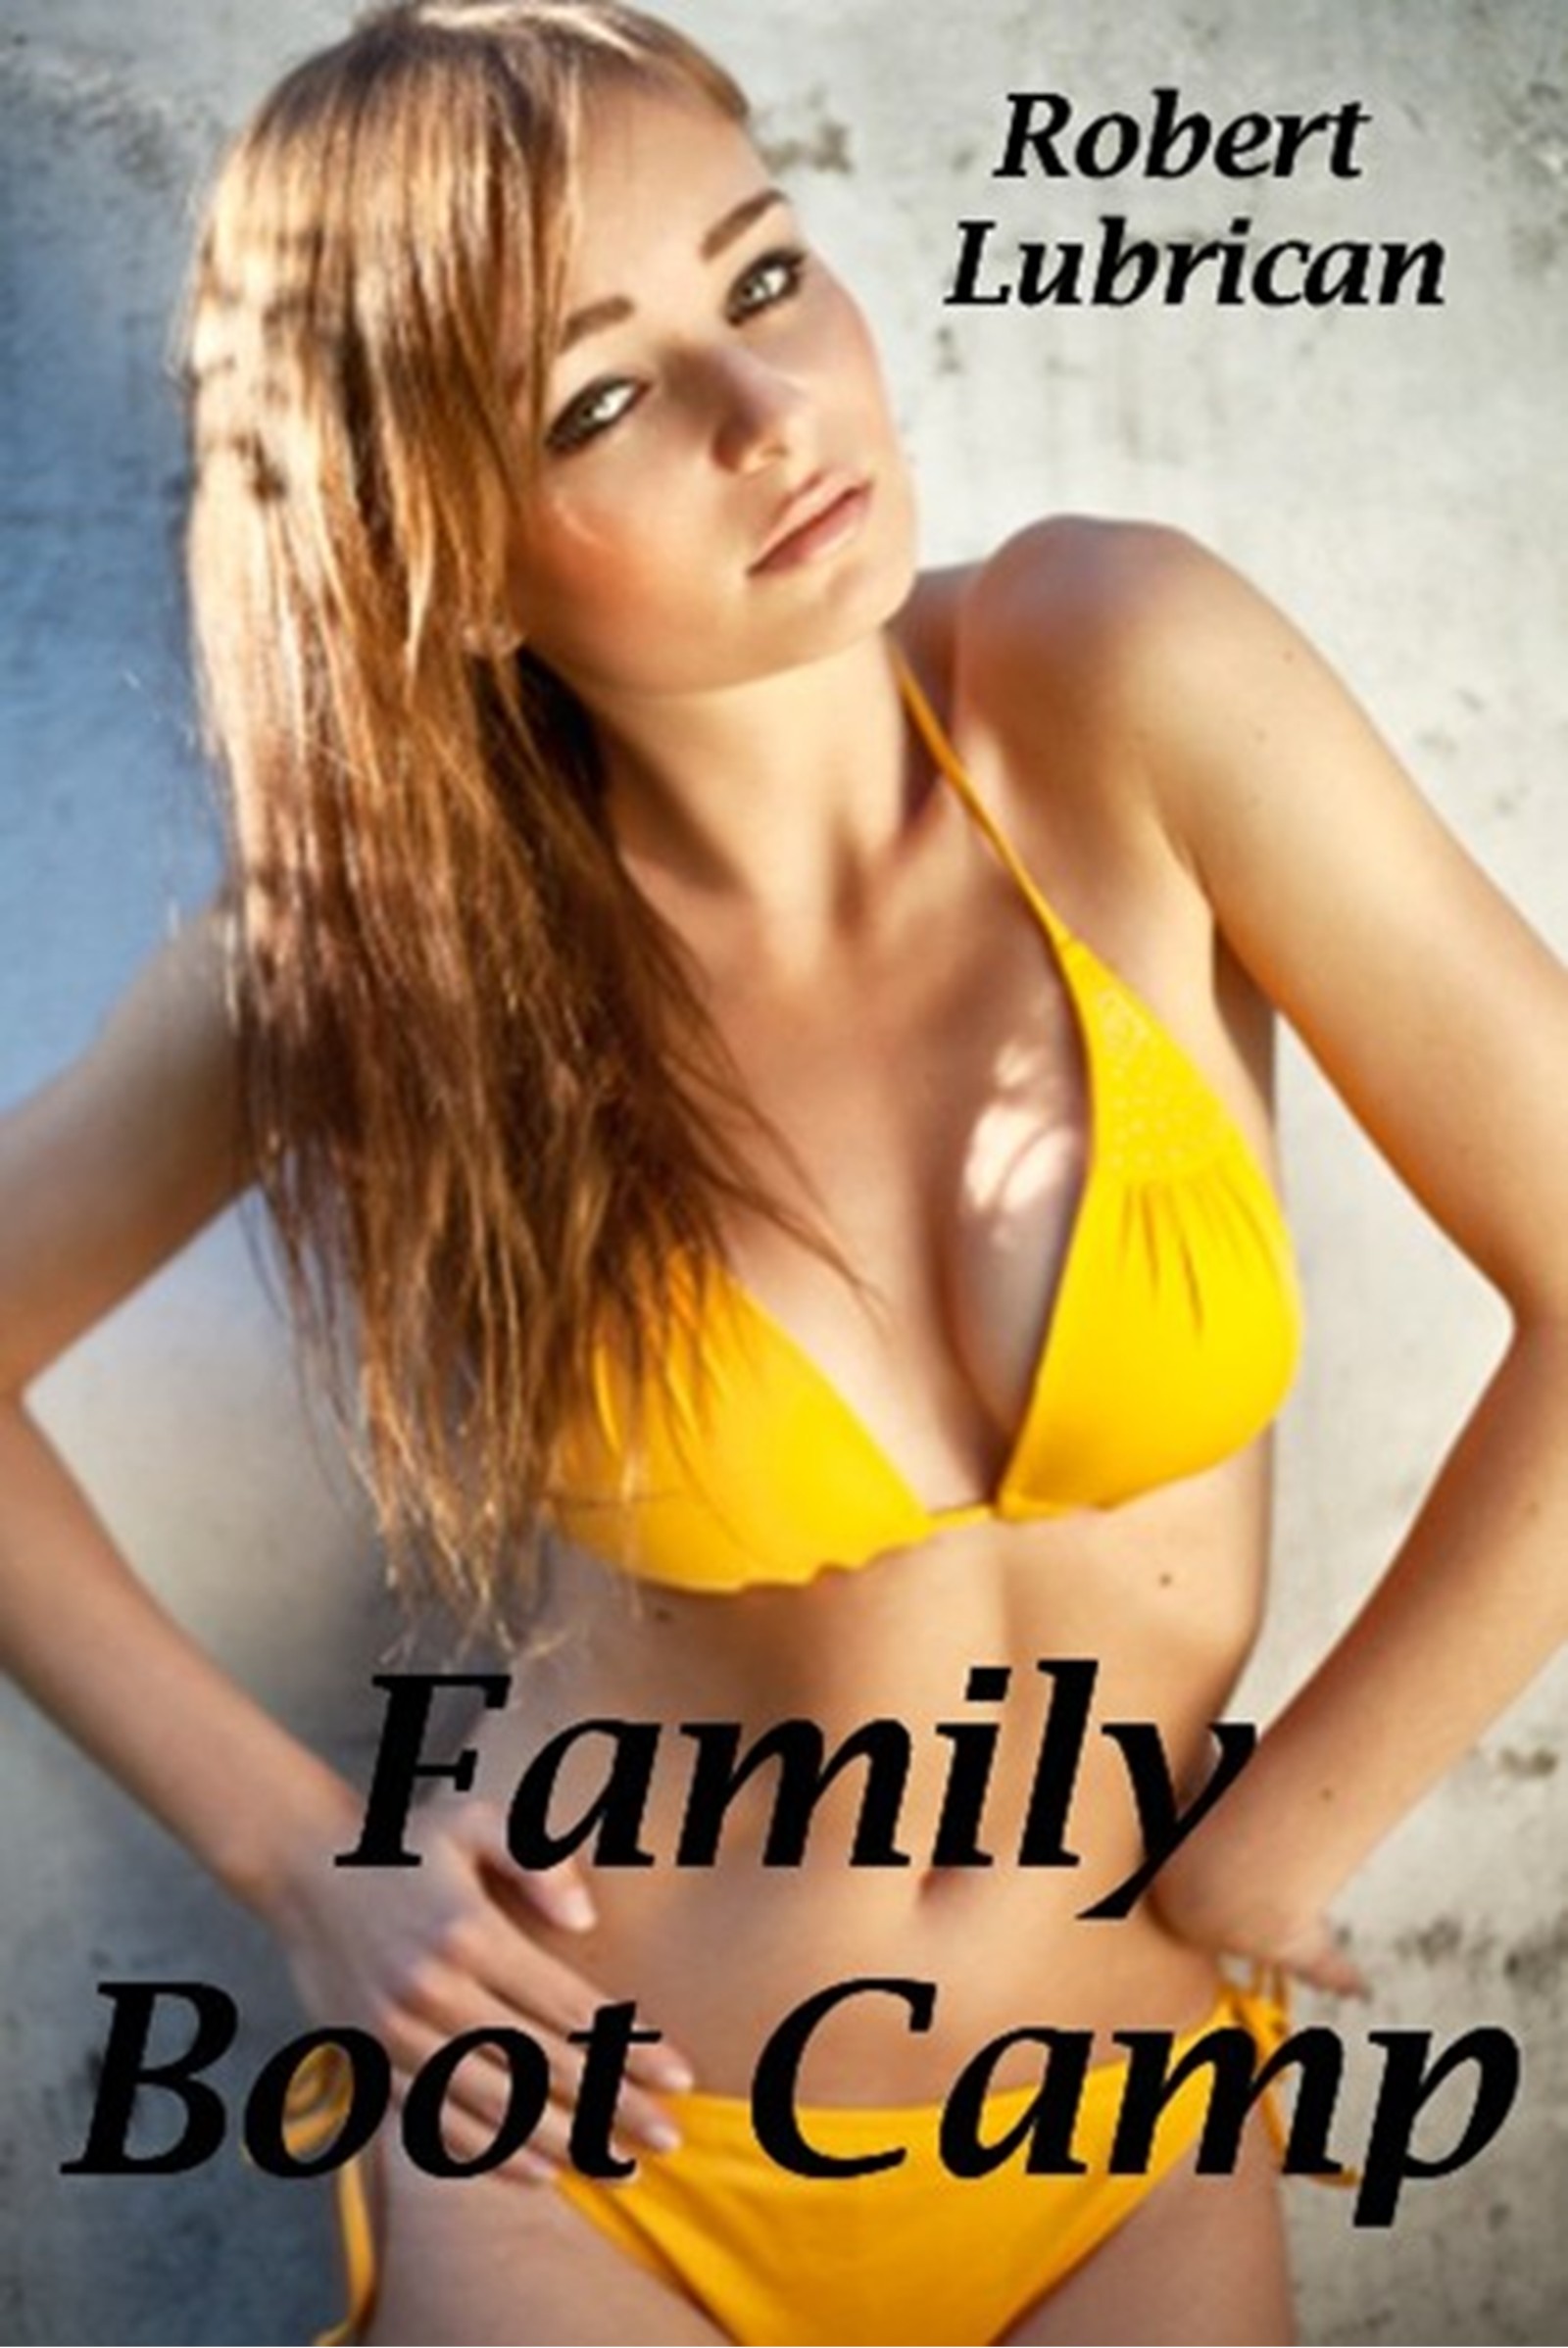 Uncle Incest Taboo Porn - Family Boot Camp, an Ebook by Robert Lubrican